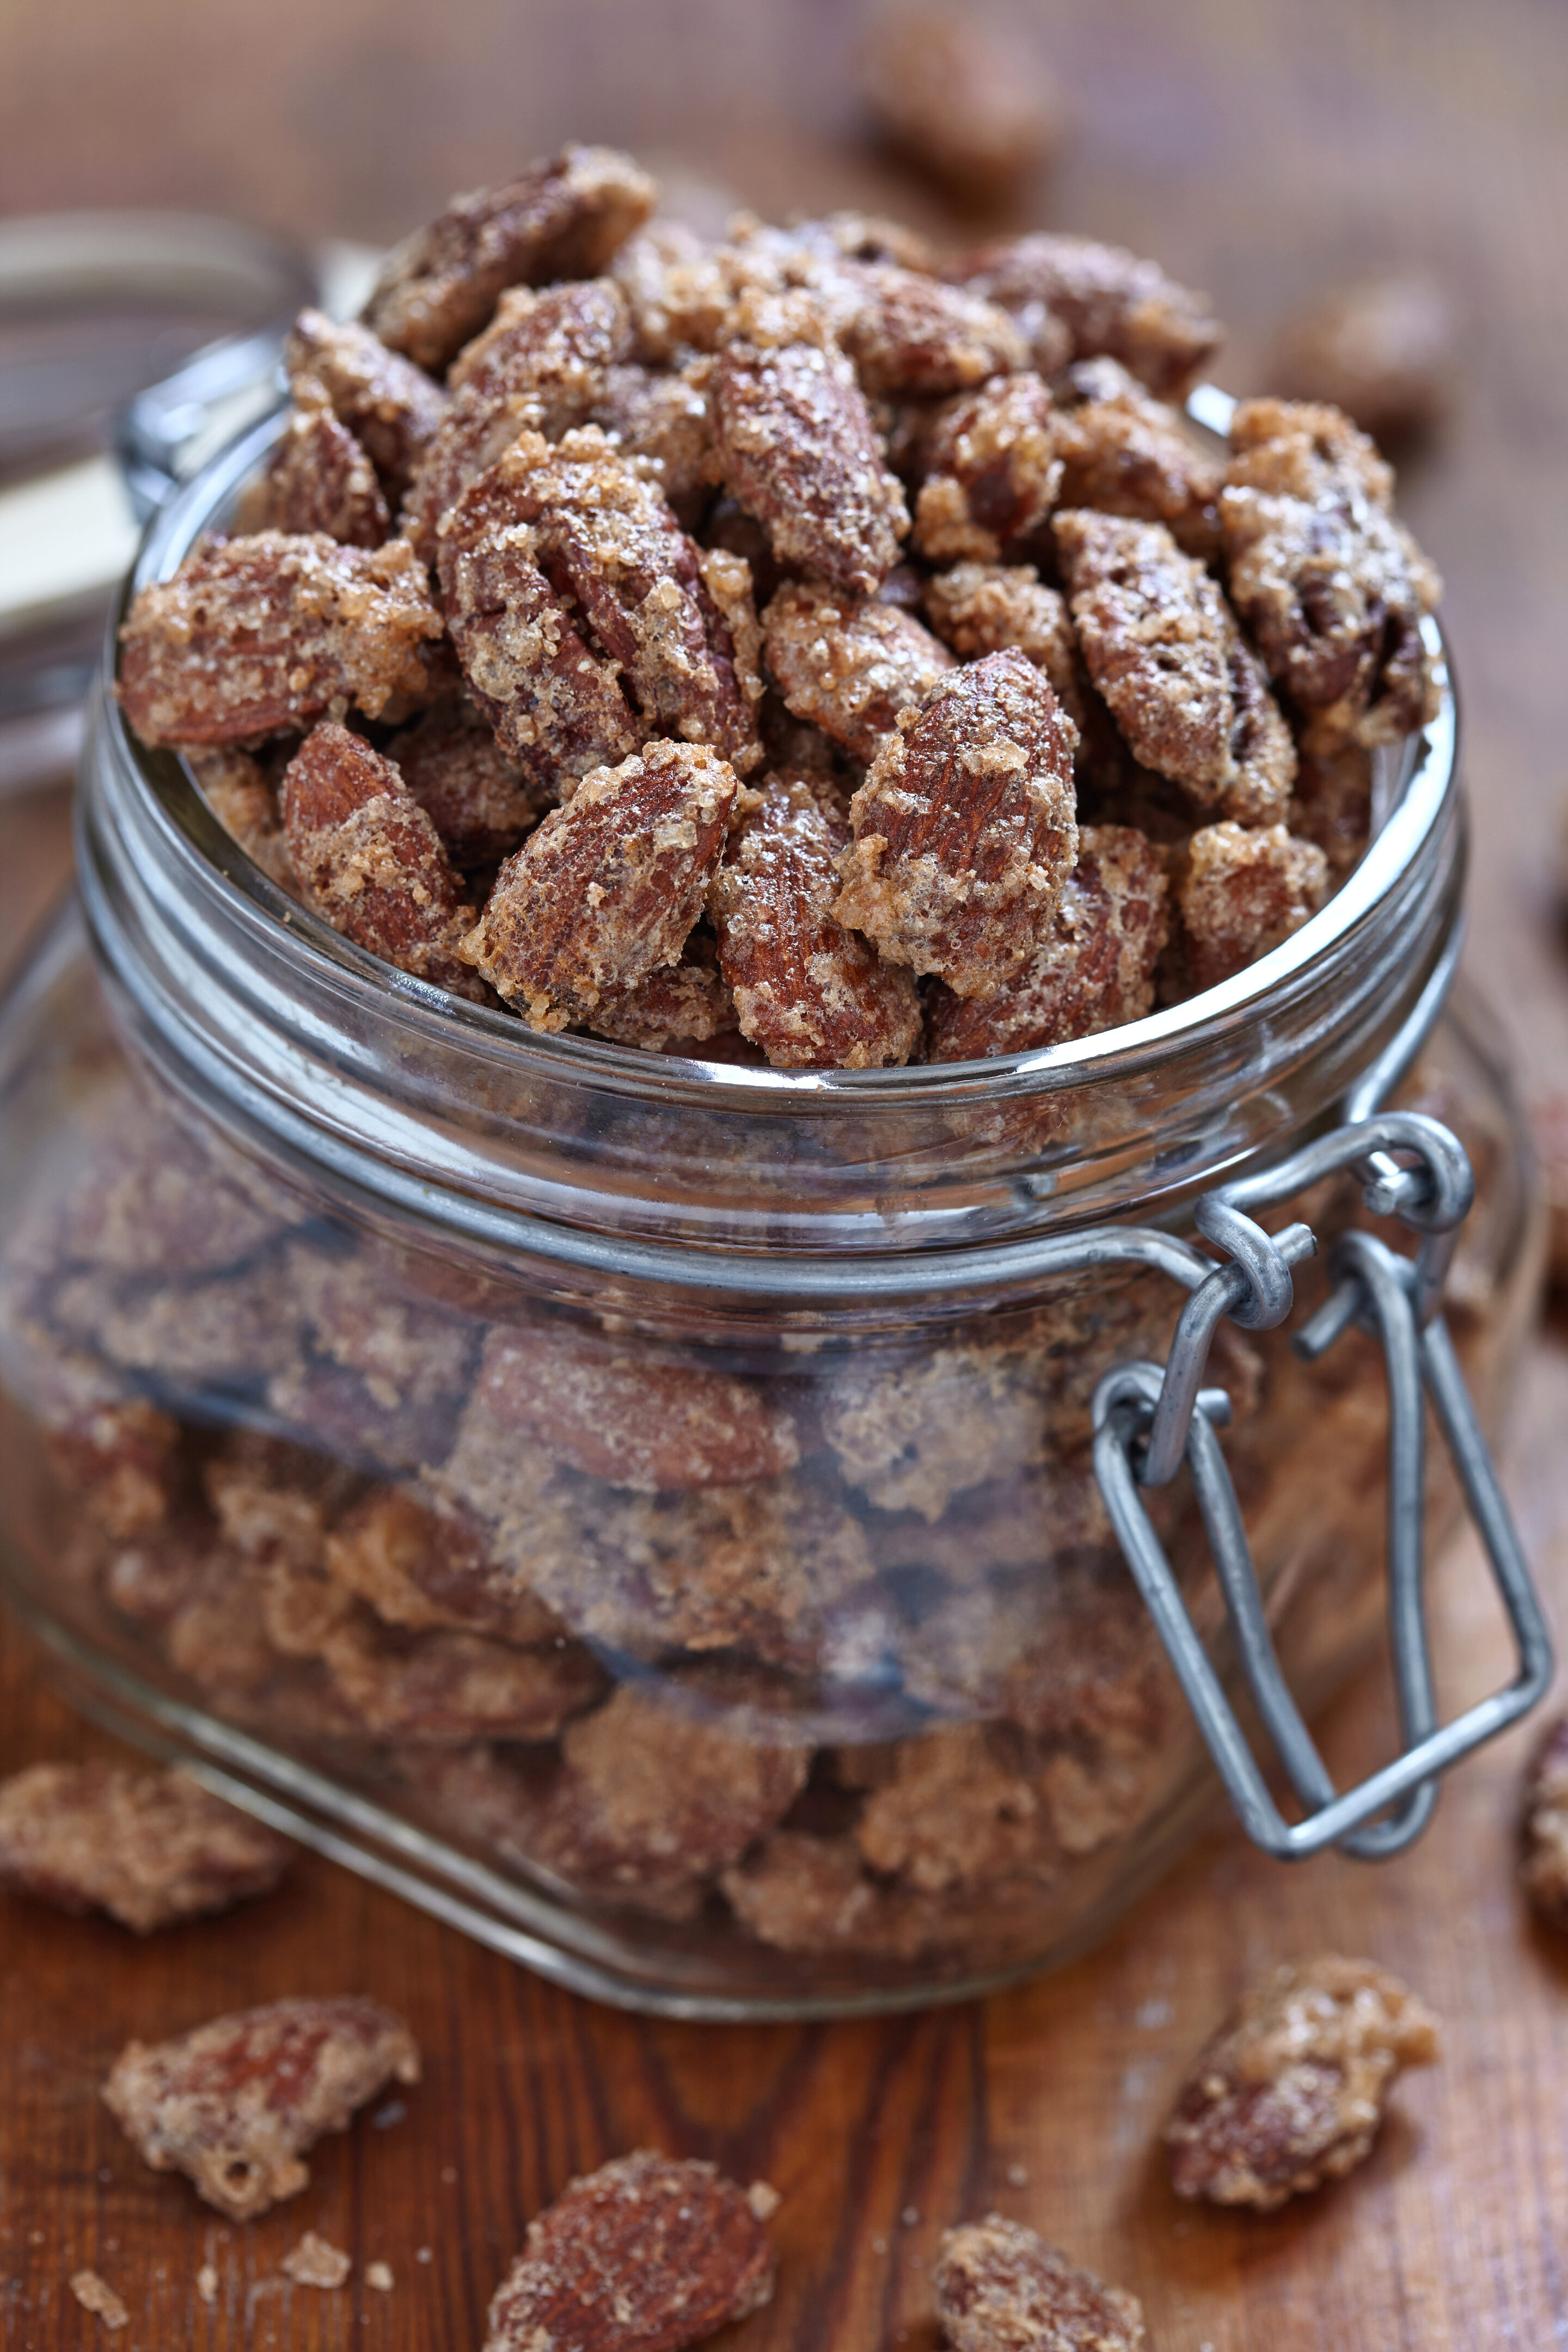 Amazing Candied Nuts recipe. Make with almonds, pecans or your favorite nut.